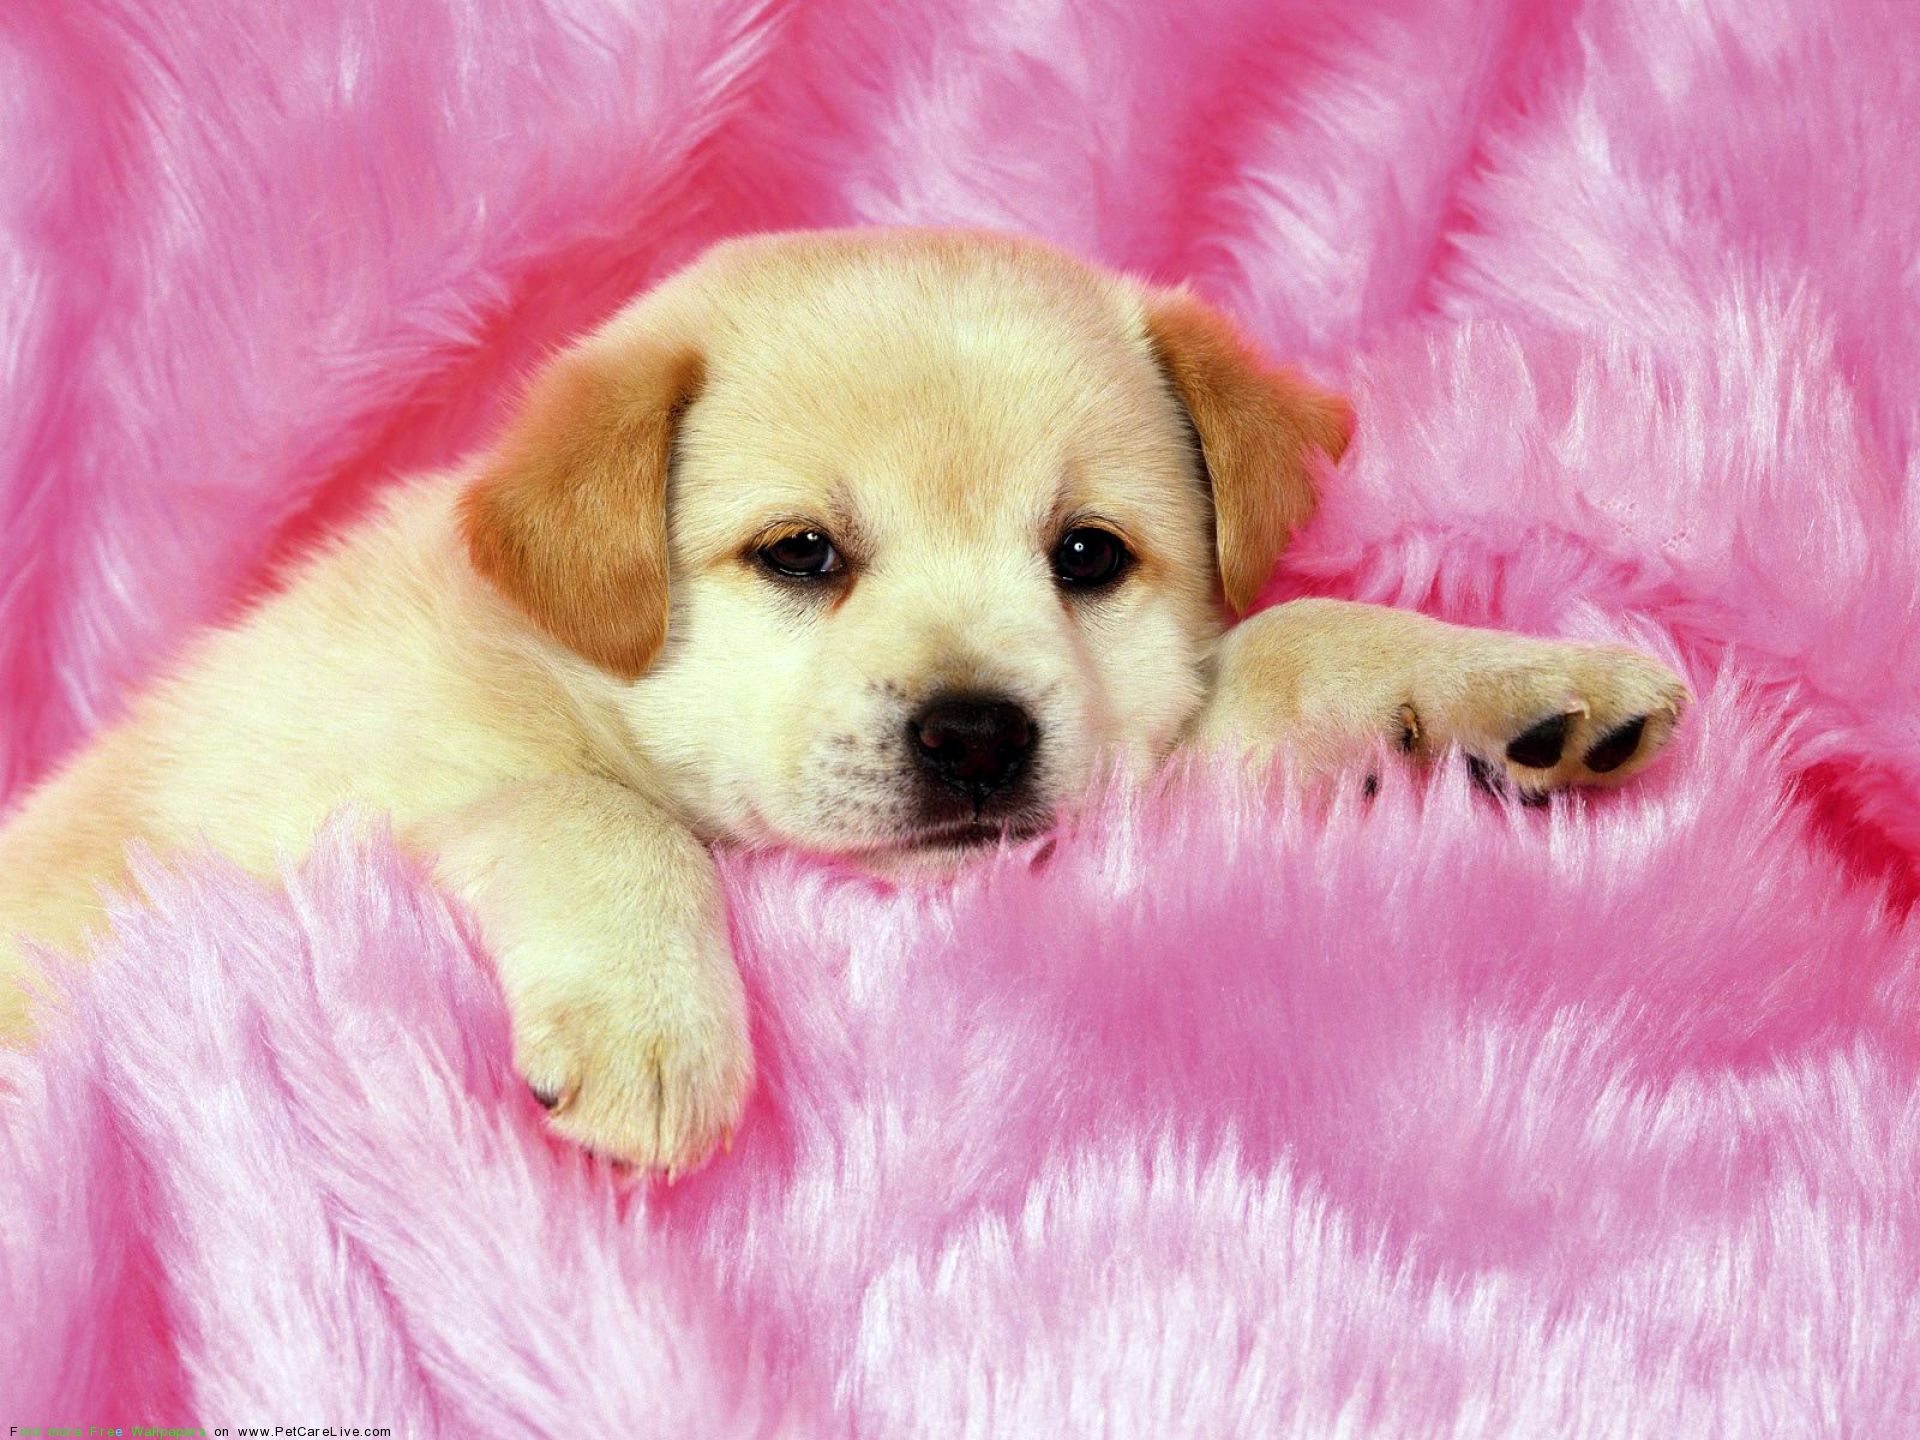 Cute Little Puppys Puppy Pictures Widescreen With Small High